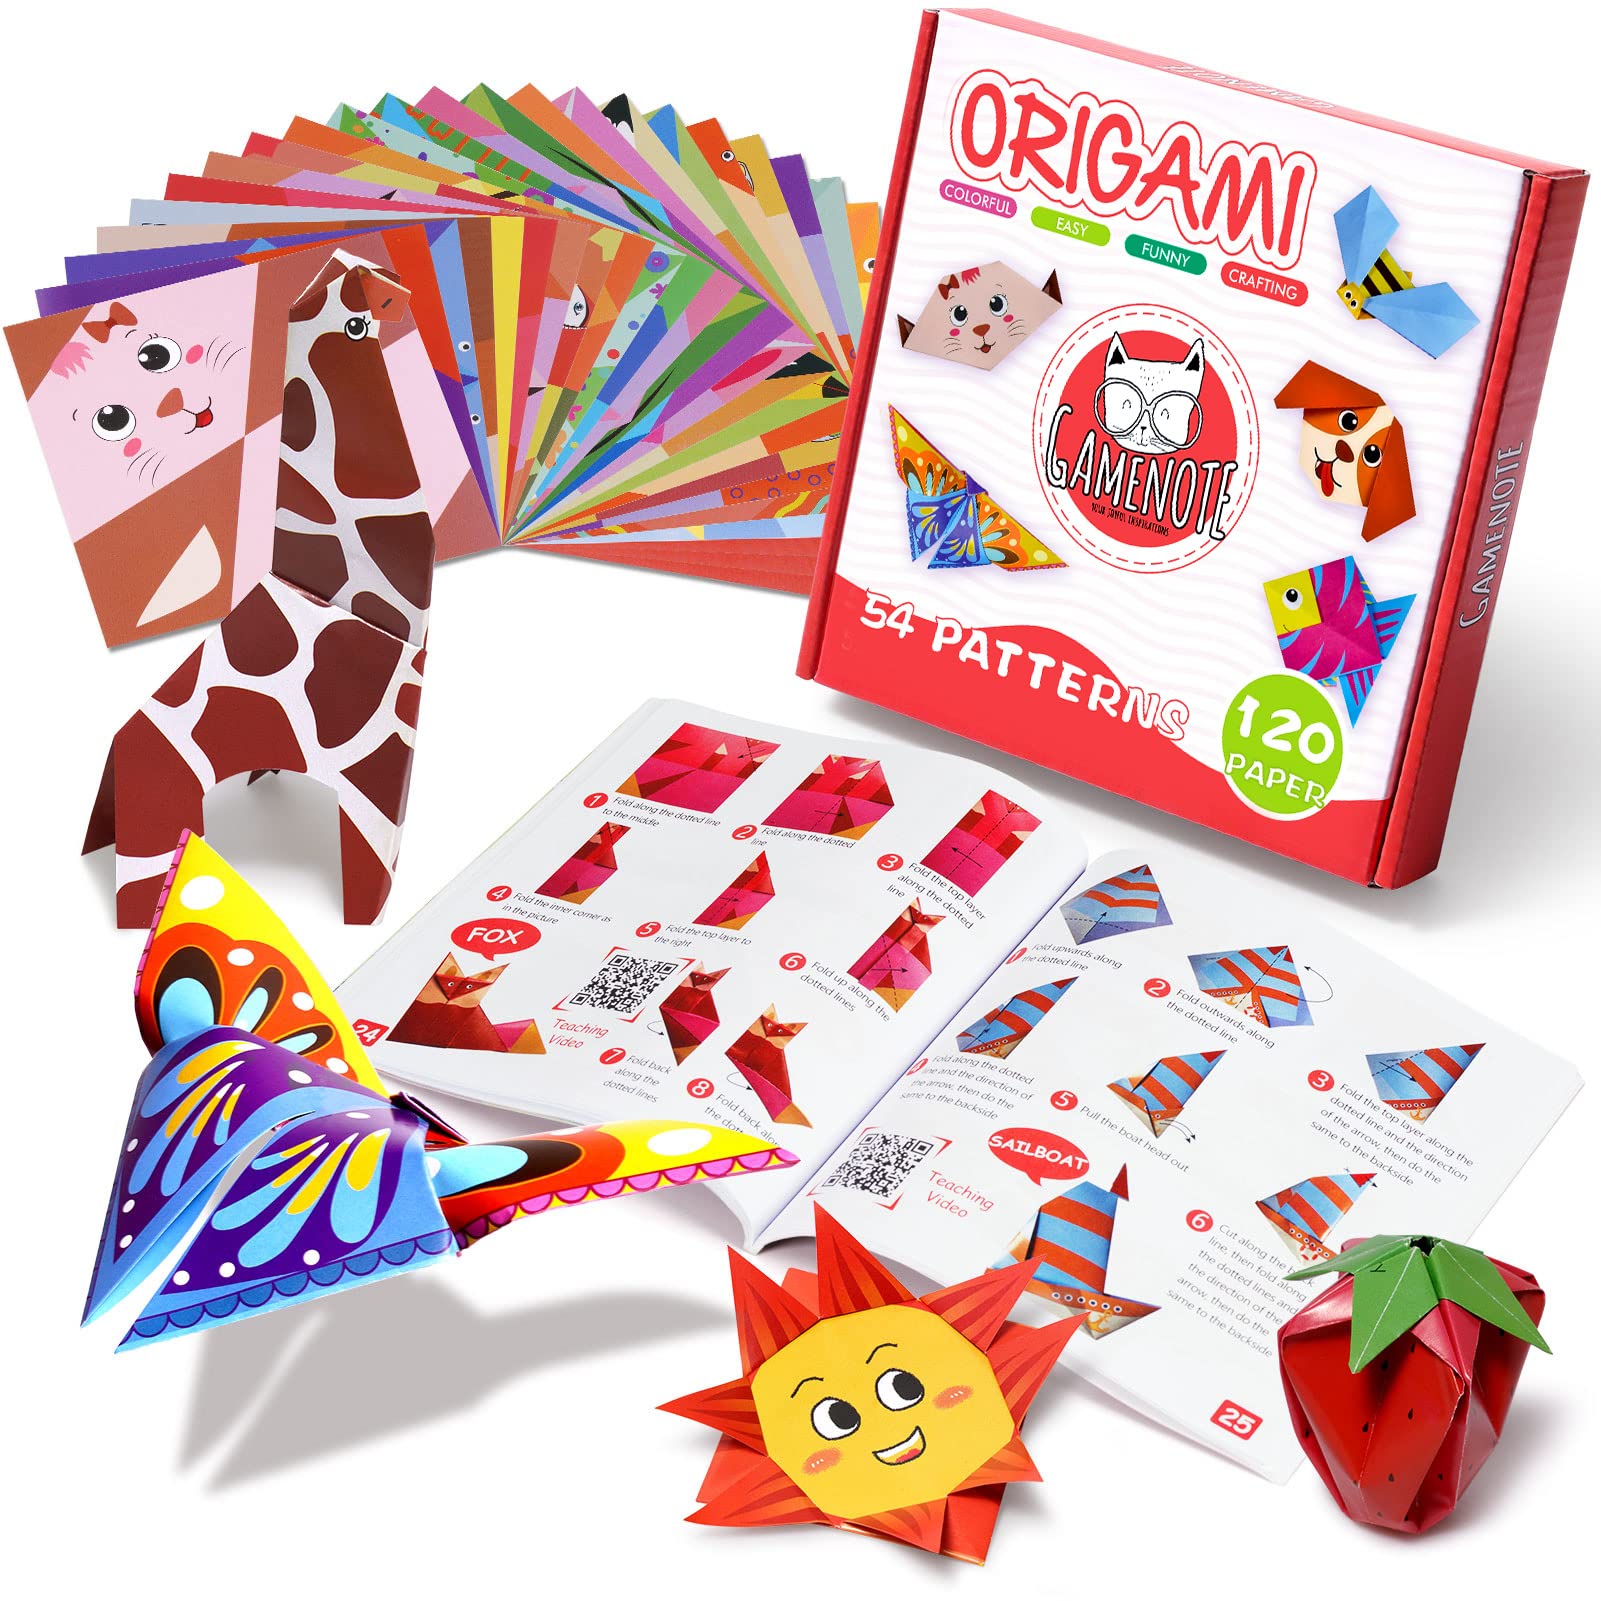 Simple origami for kids and their parents. Selection of funny and